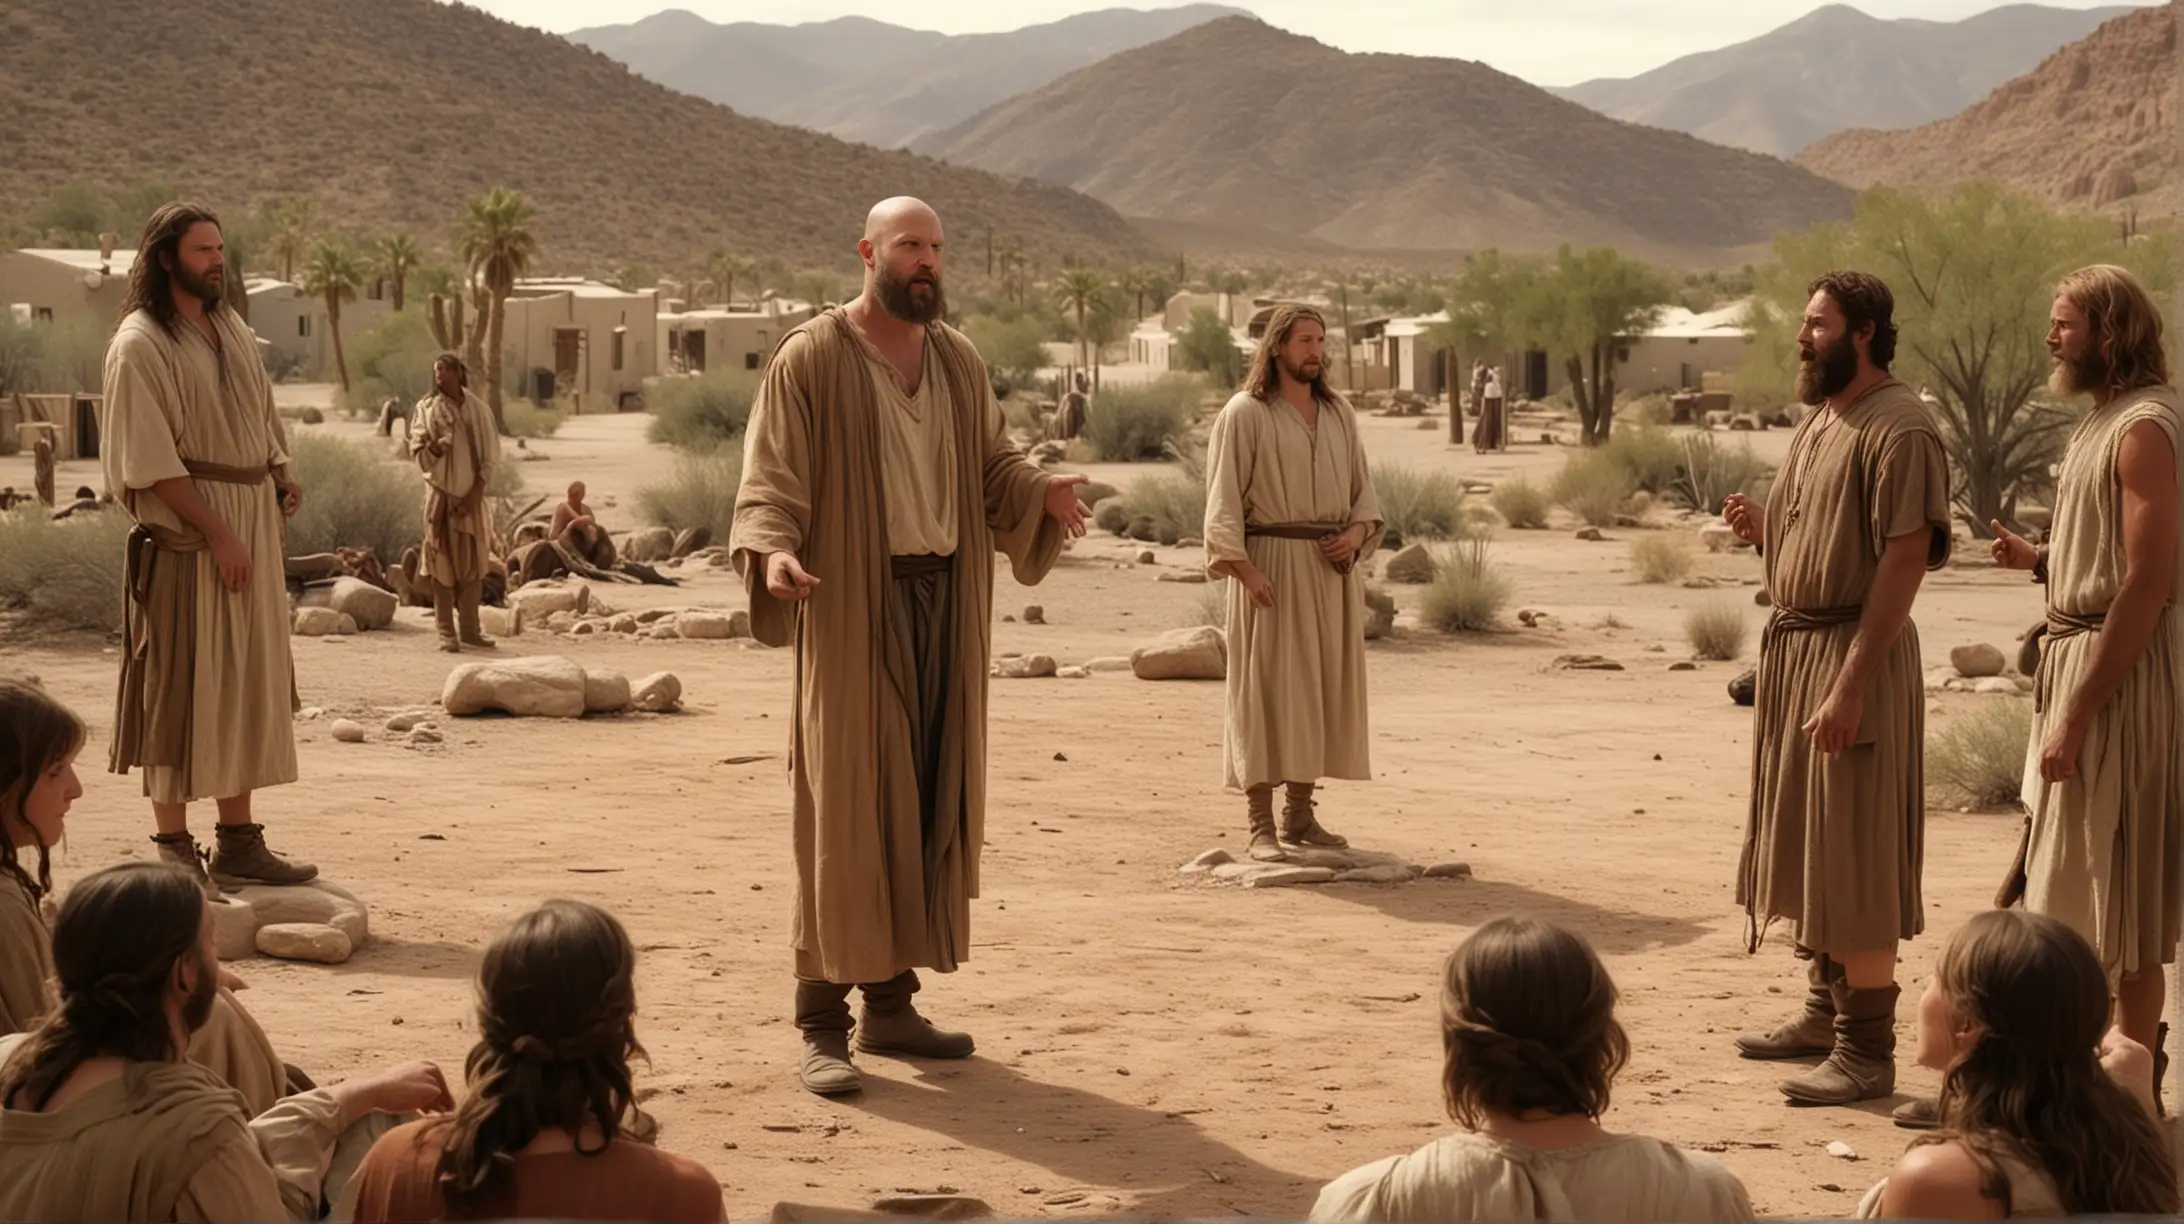  a bald man with a a brown haired beard addresses a small group of people in a desert town setting. Set during the biblical era of Elijah.